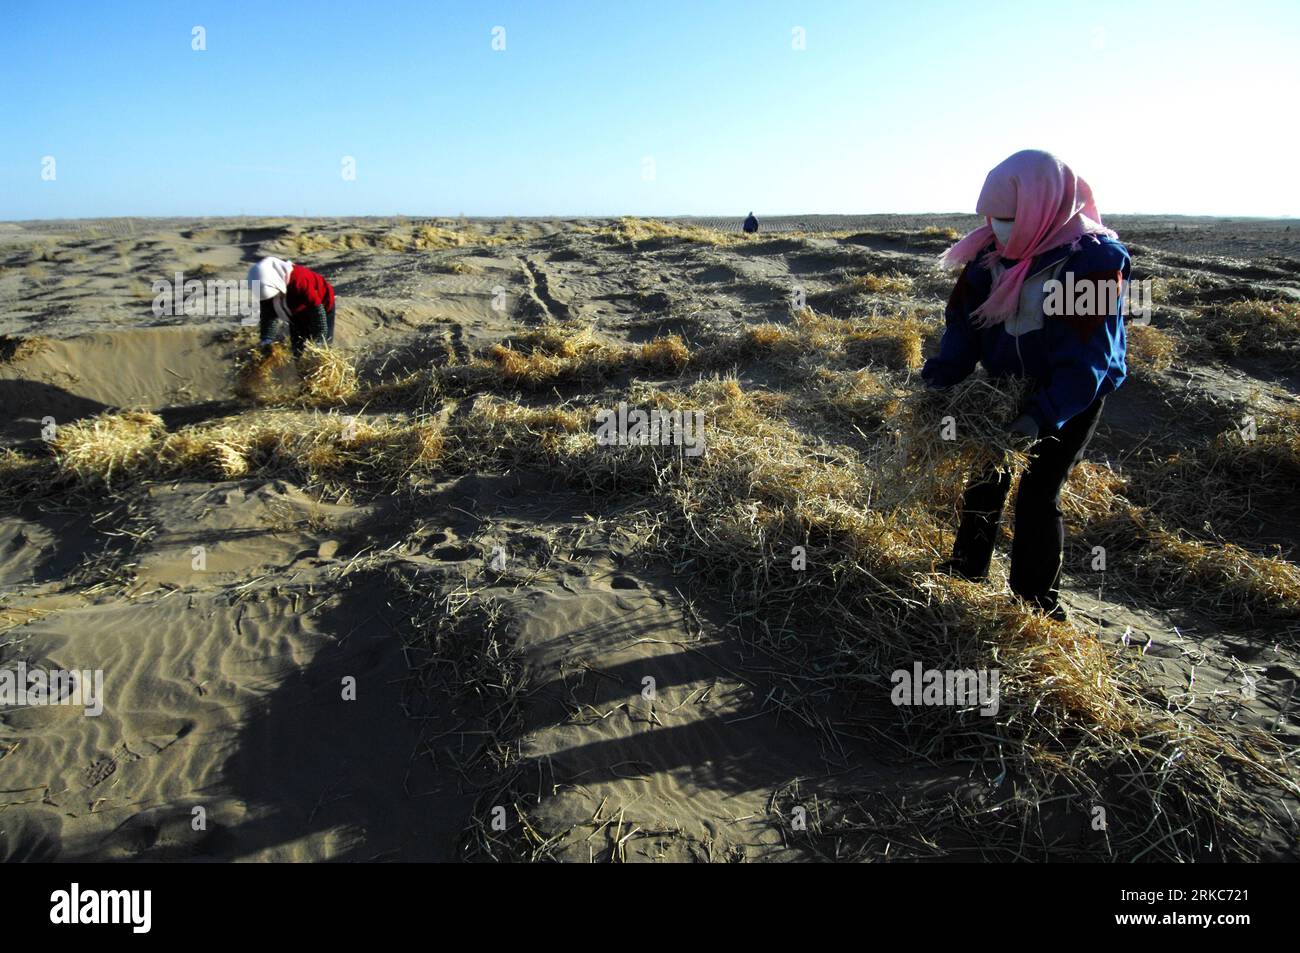 Bildnummer: 54683345  Datum: 27.11.2010  Copyright: imago/Xinhua (101129) -- MINQIN, Nov. 29, 2010 (Xinhua) -- Local farmers fixate sand with wheat straws and achnatherum stalks in the Laohukou desert in Minqin County, northwest China s Gansu Province, Nov. 27, 2010. Located in Minqin County, the Qingtu Lake, suffered from drought for over 50 years, witnessed three square kilometers of water surface again after 8.6 million cubic meters of water from Shiyang River were infused into the lake by the end of October this year. Extensive farming since the 1950s sapped underground water in Minqin and Stock Photo